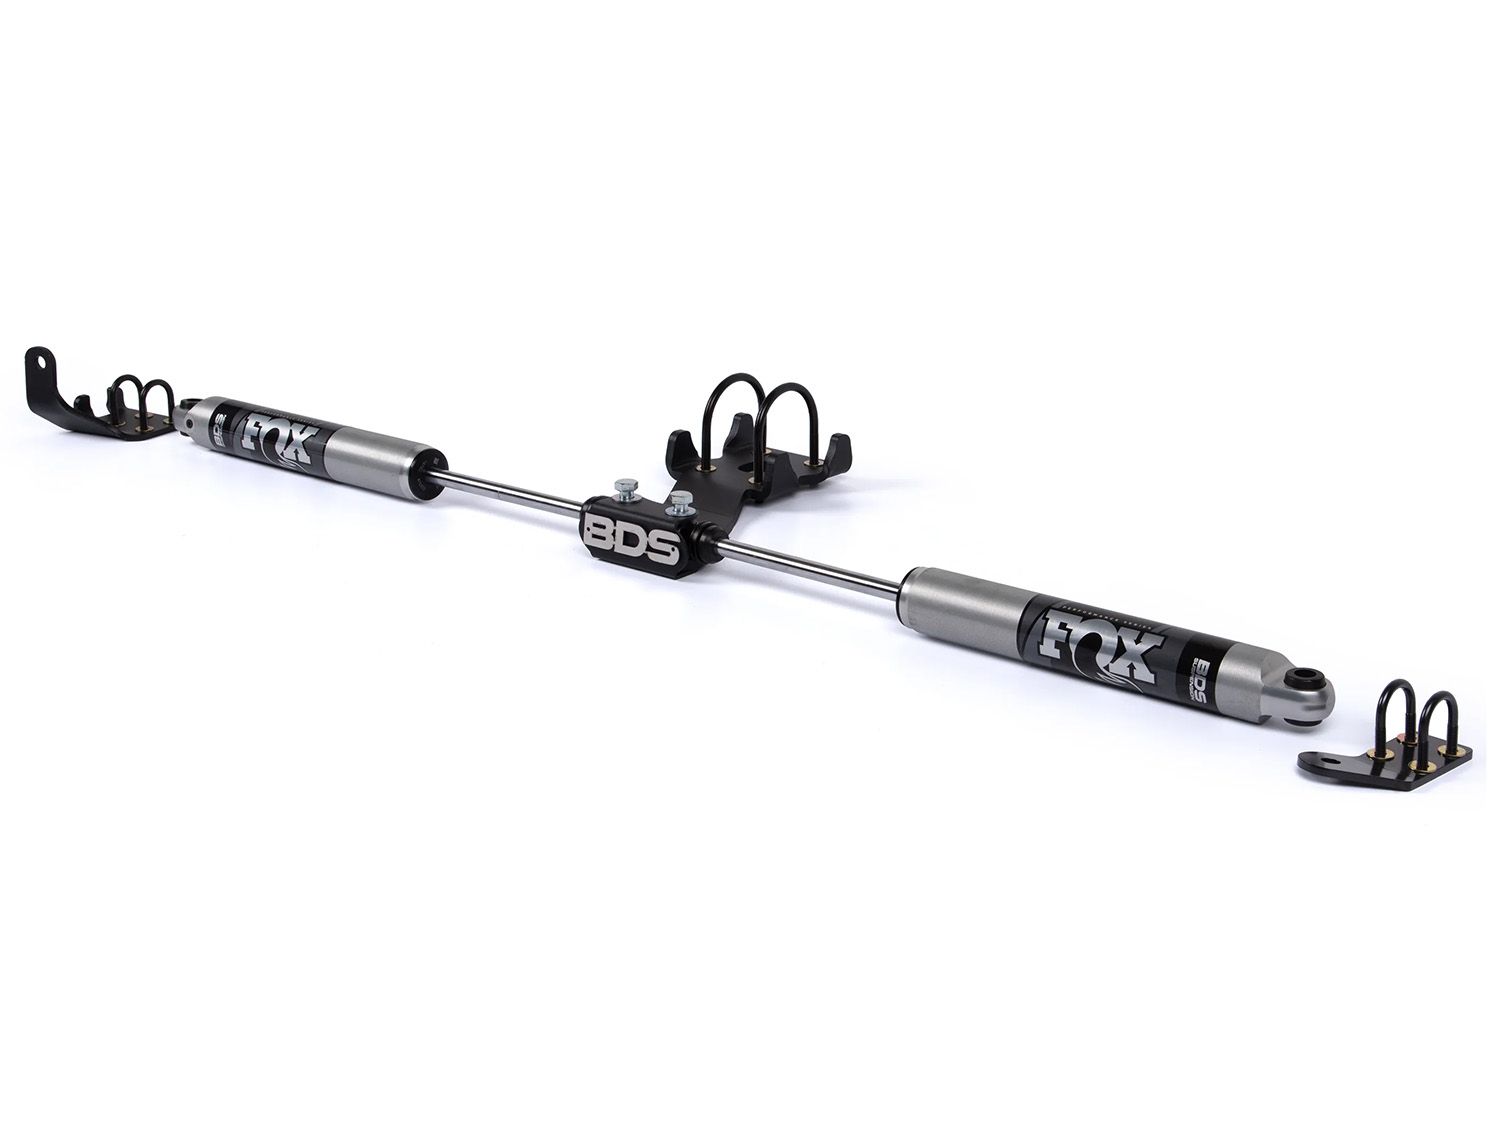 Ram 1500 1994-2001 Dodge 4WD - Fox Dual Steering Stabilizer by BDS